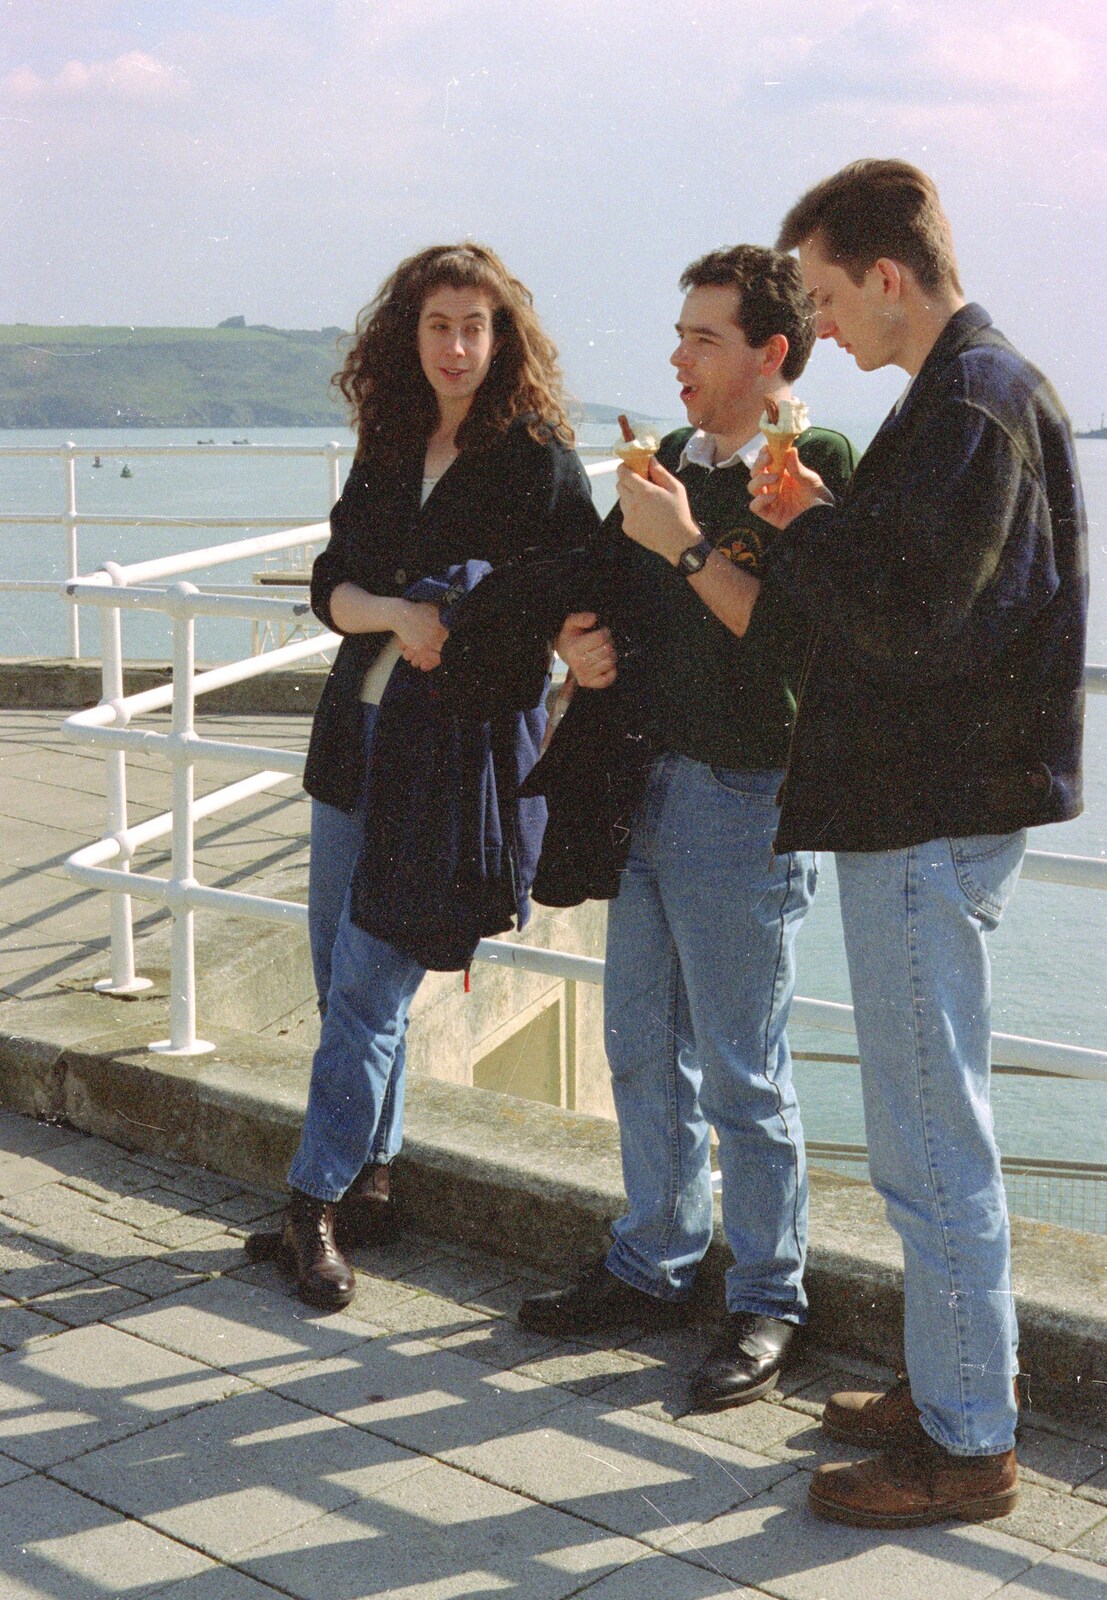 Russell and Andrew do ice creams, as Vicky looks on from Uni: A CISU Trip To Plymouth, Devon - 16th March 1996